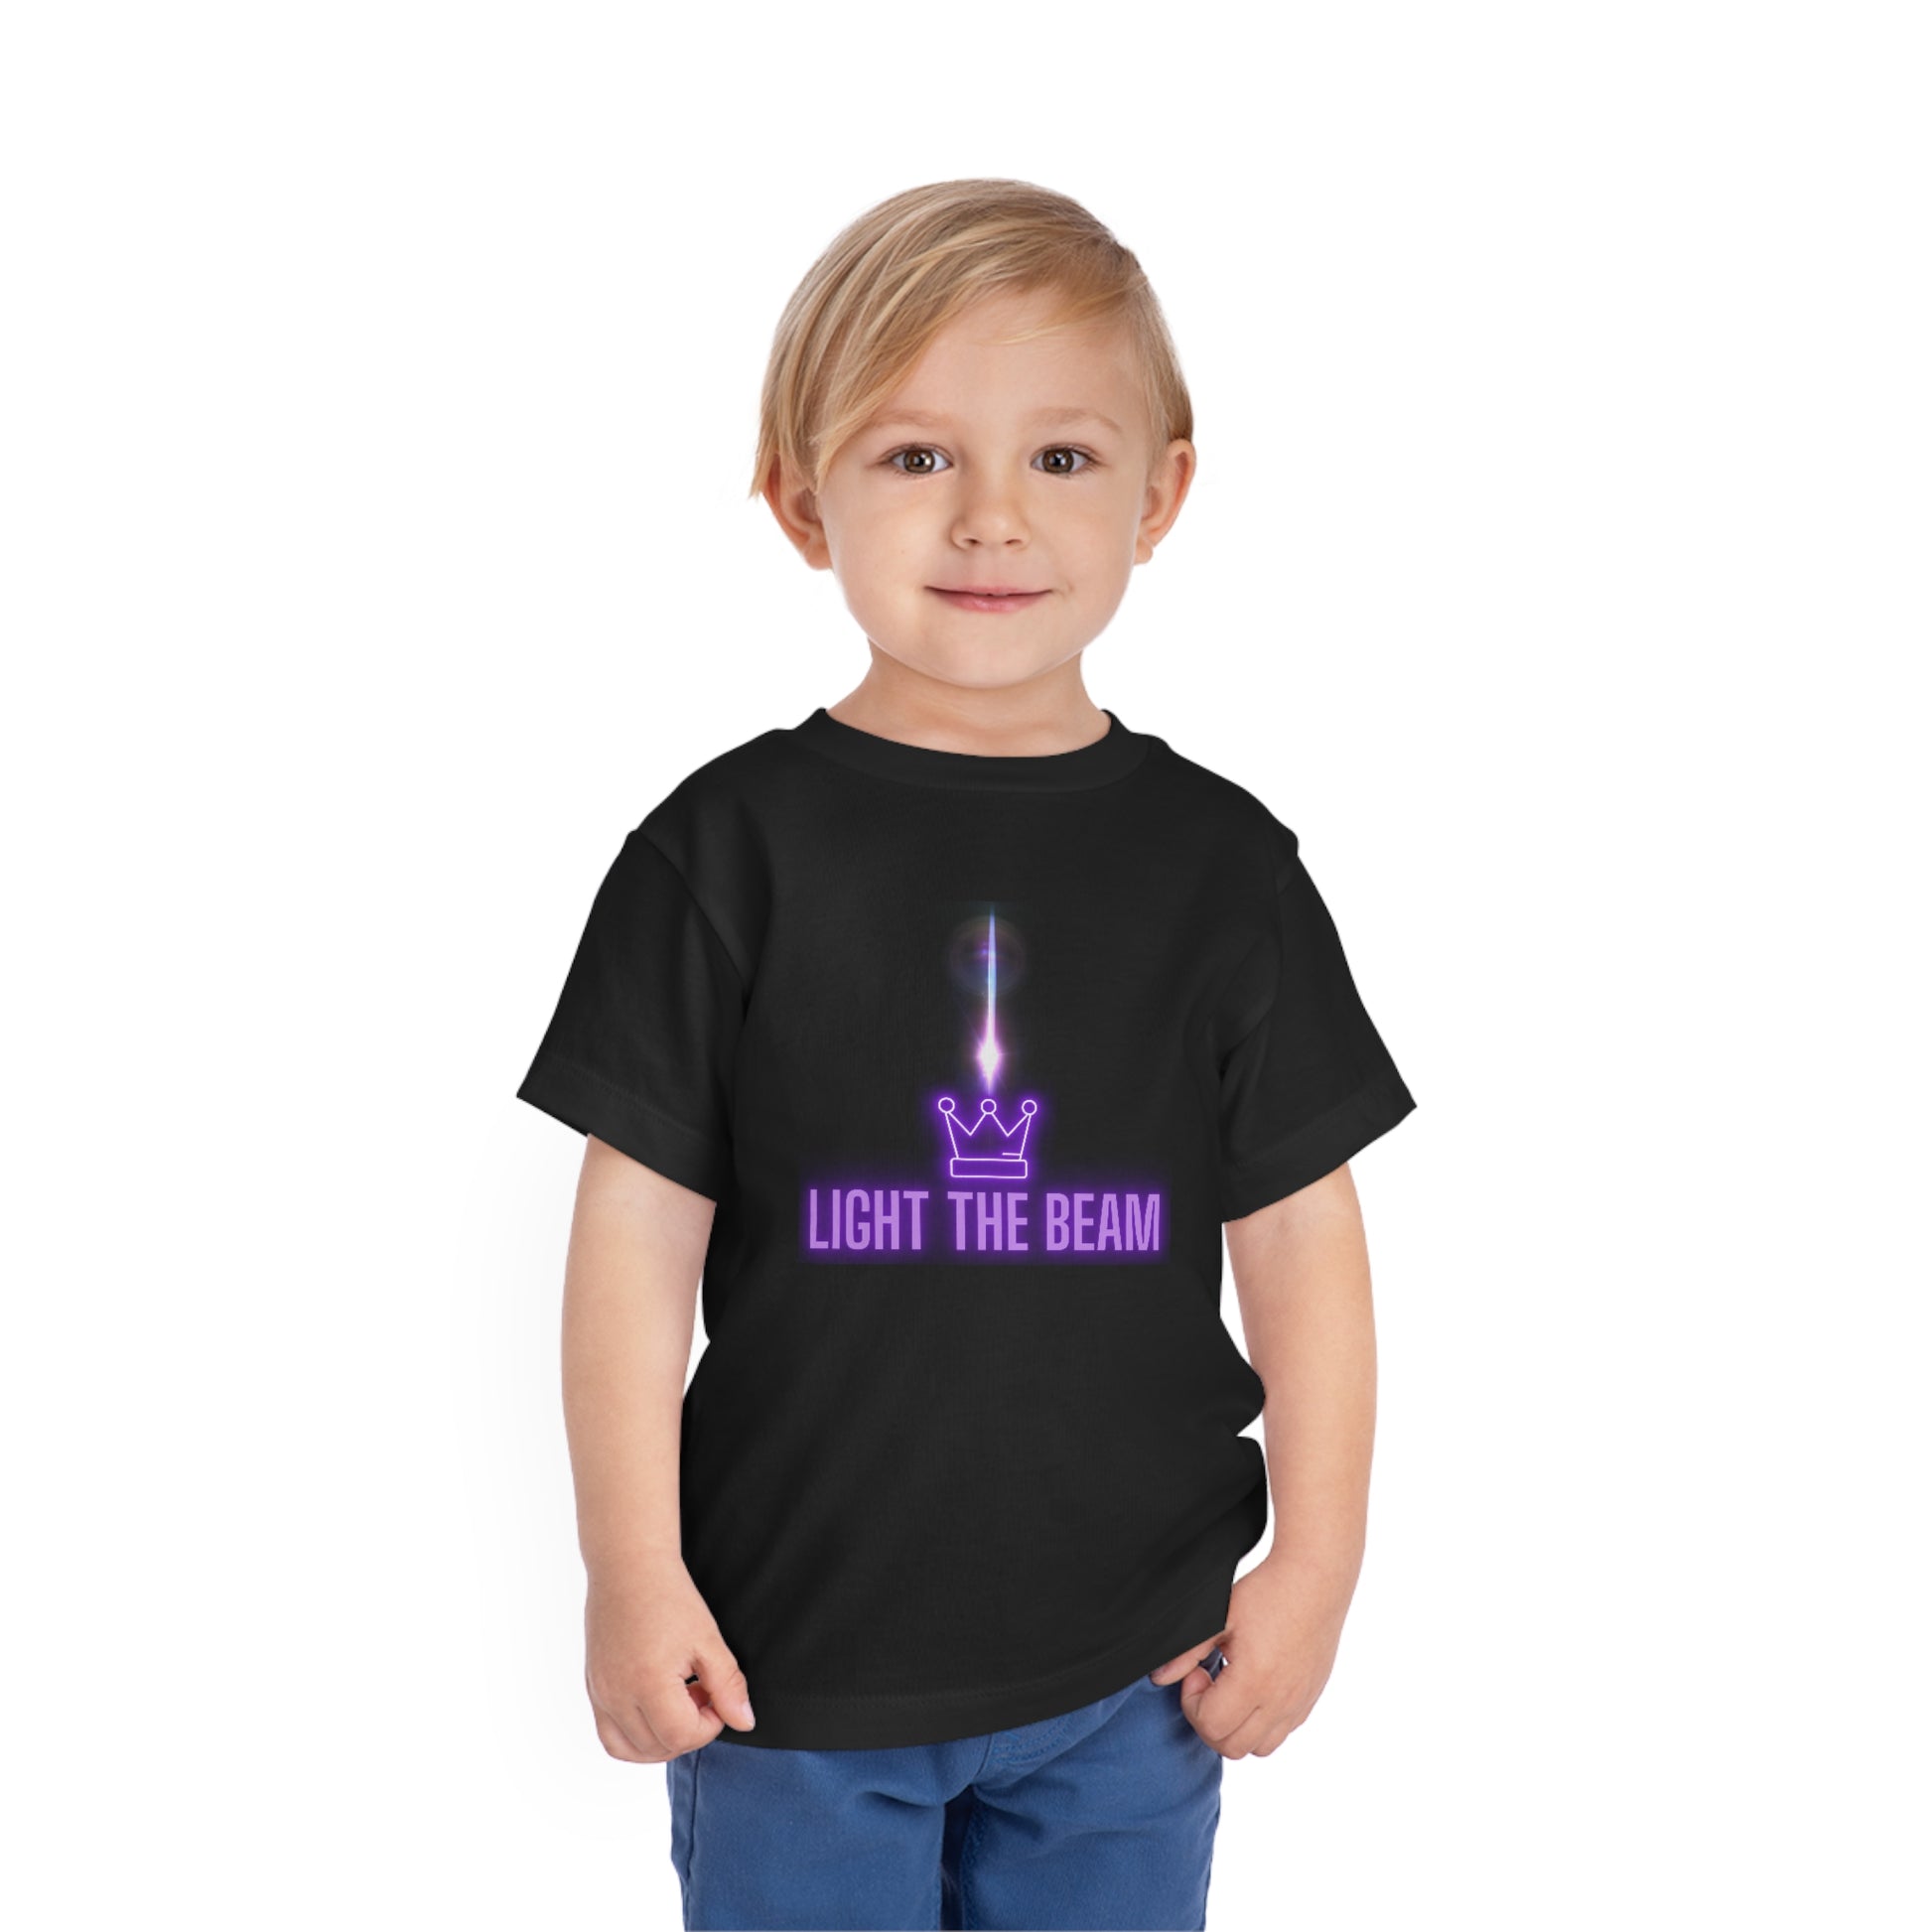 Light the Beam Kings Basketball, Toddler T-Shirt, Sacramento Basketball Shirt, Kings Fan Baby Tee Gift, Sacramento Gift for Toddler,Kids LOVE to Light the Beam! Celebrate another W - WIN - for your Kings Basketball team in this comfortable, cool toddler T-shirt. Perfect to wear at the game or on the playground the day after another W. Show off your Sac-Town pride! 